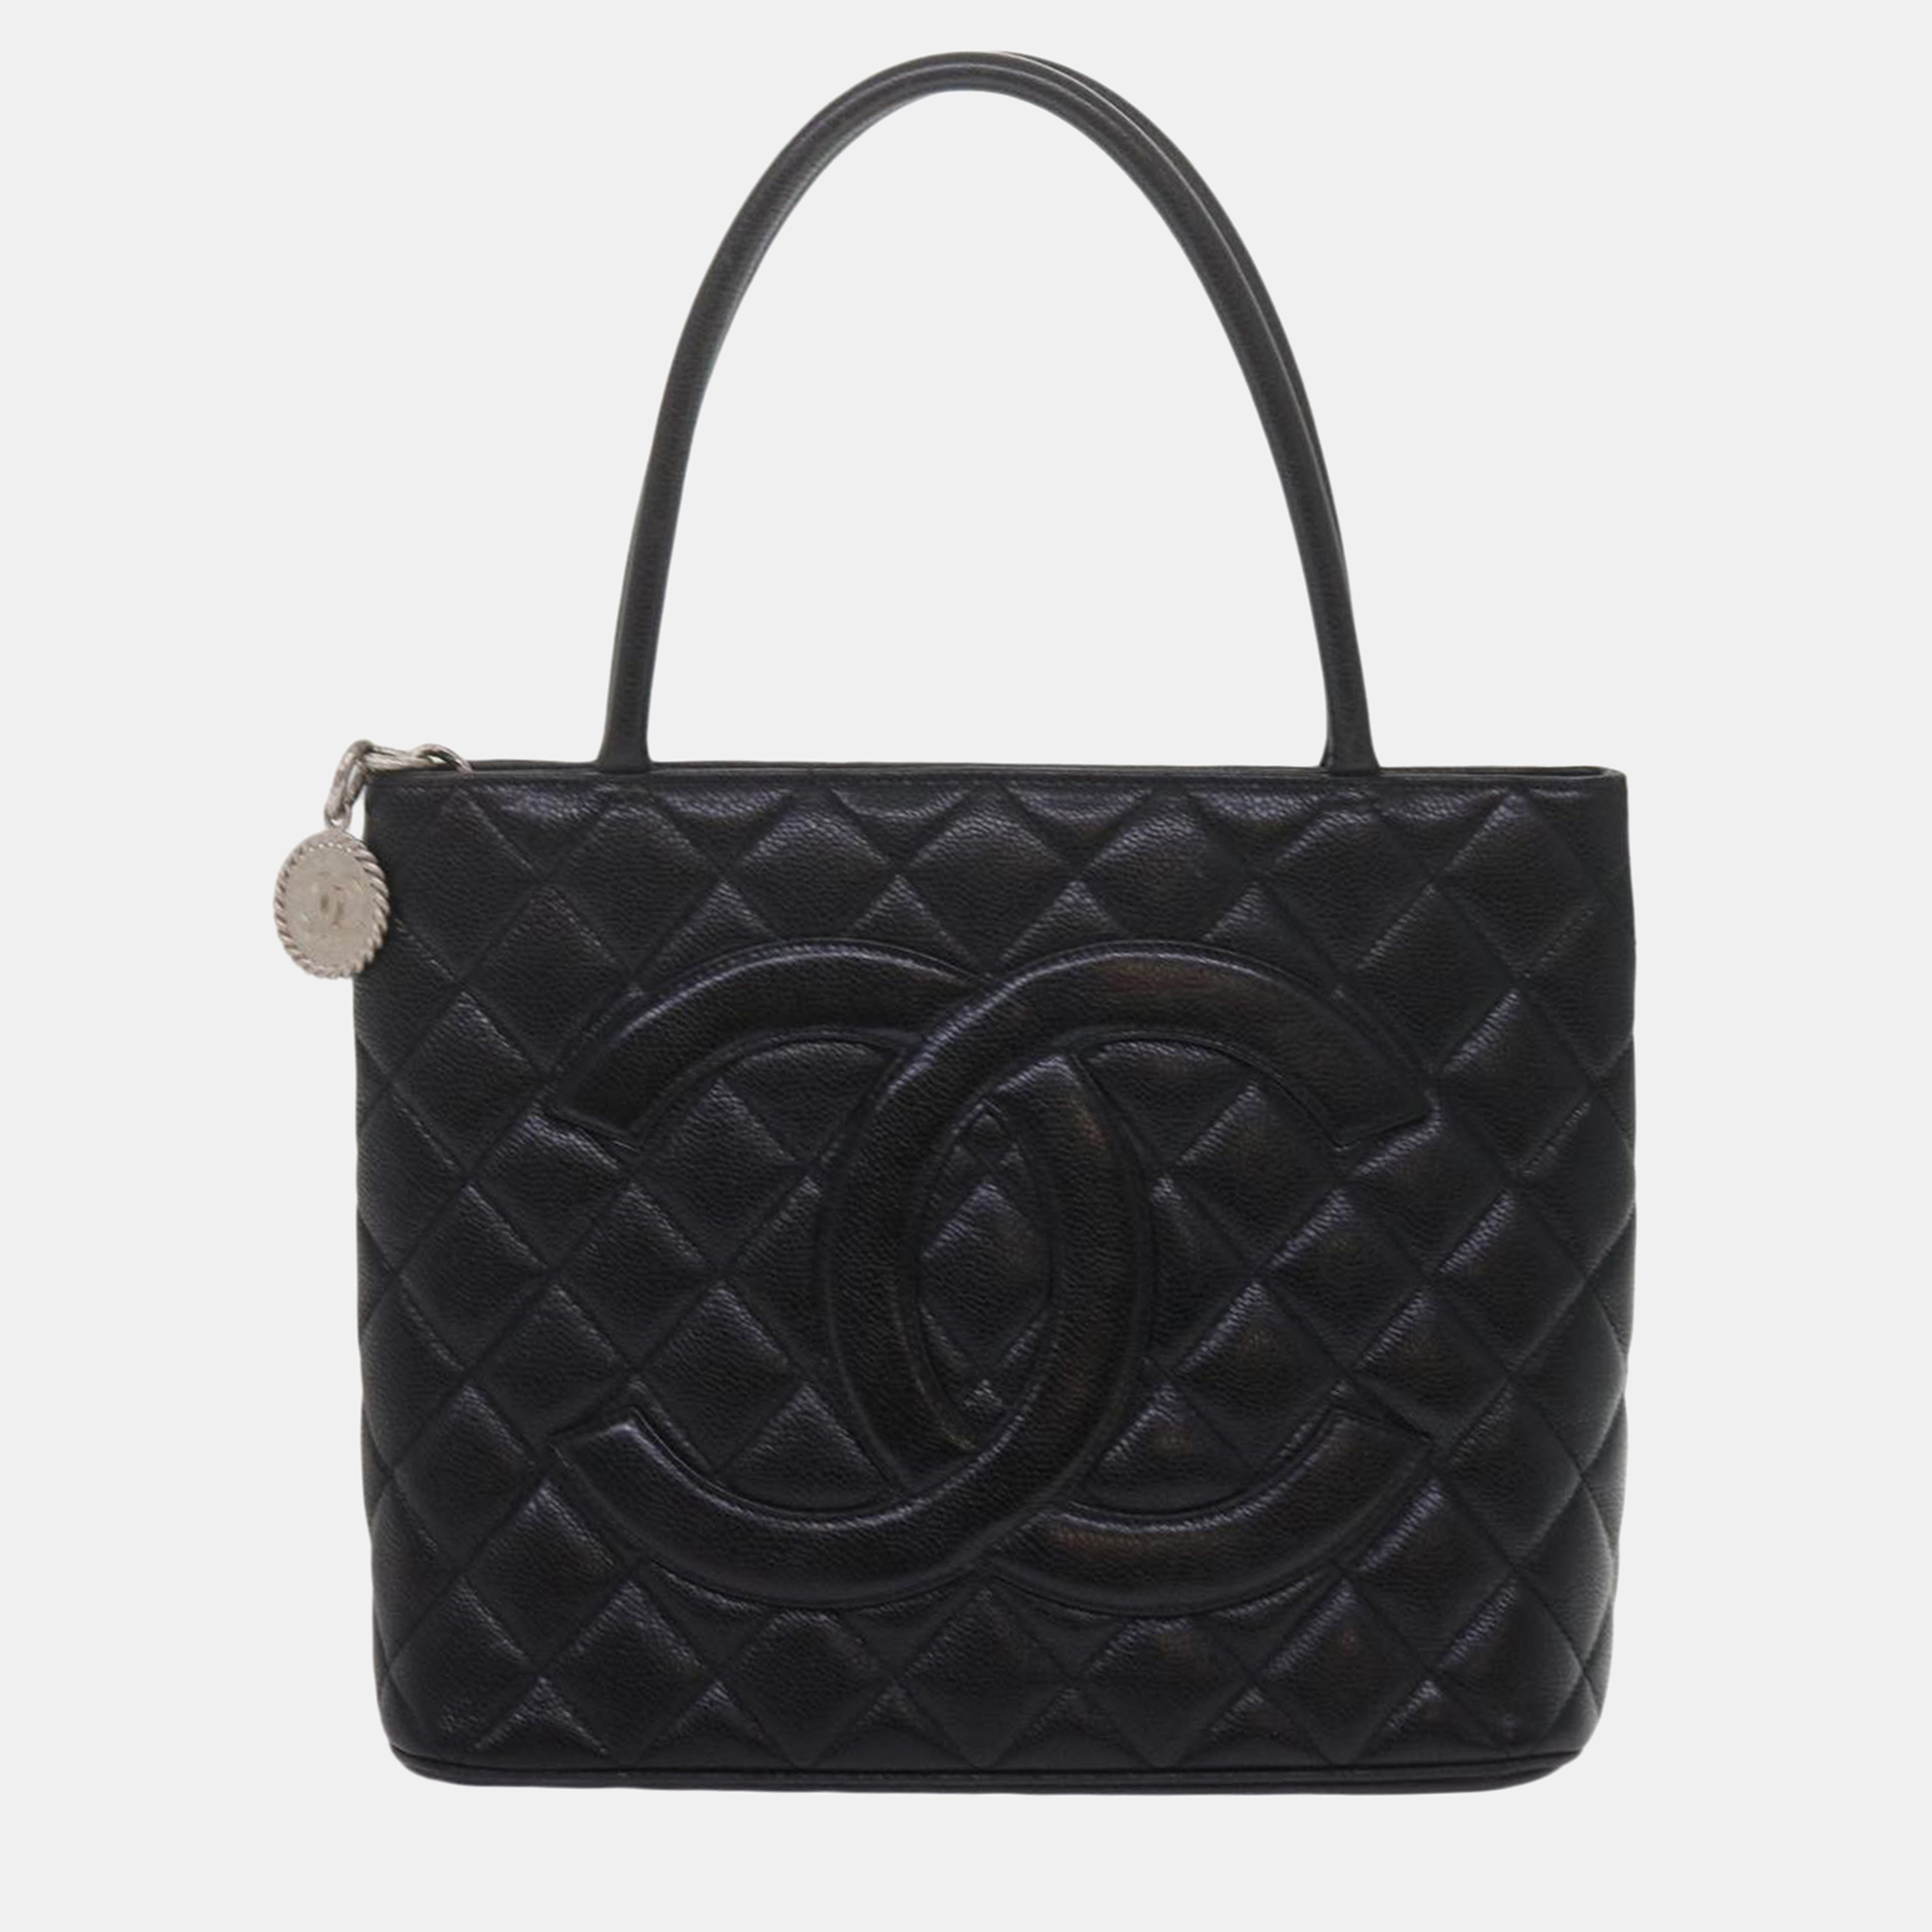 Pre-owned Chanel Black Leather Quilted Madellion Tote Bag